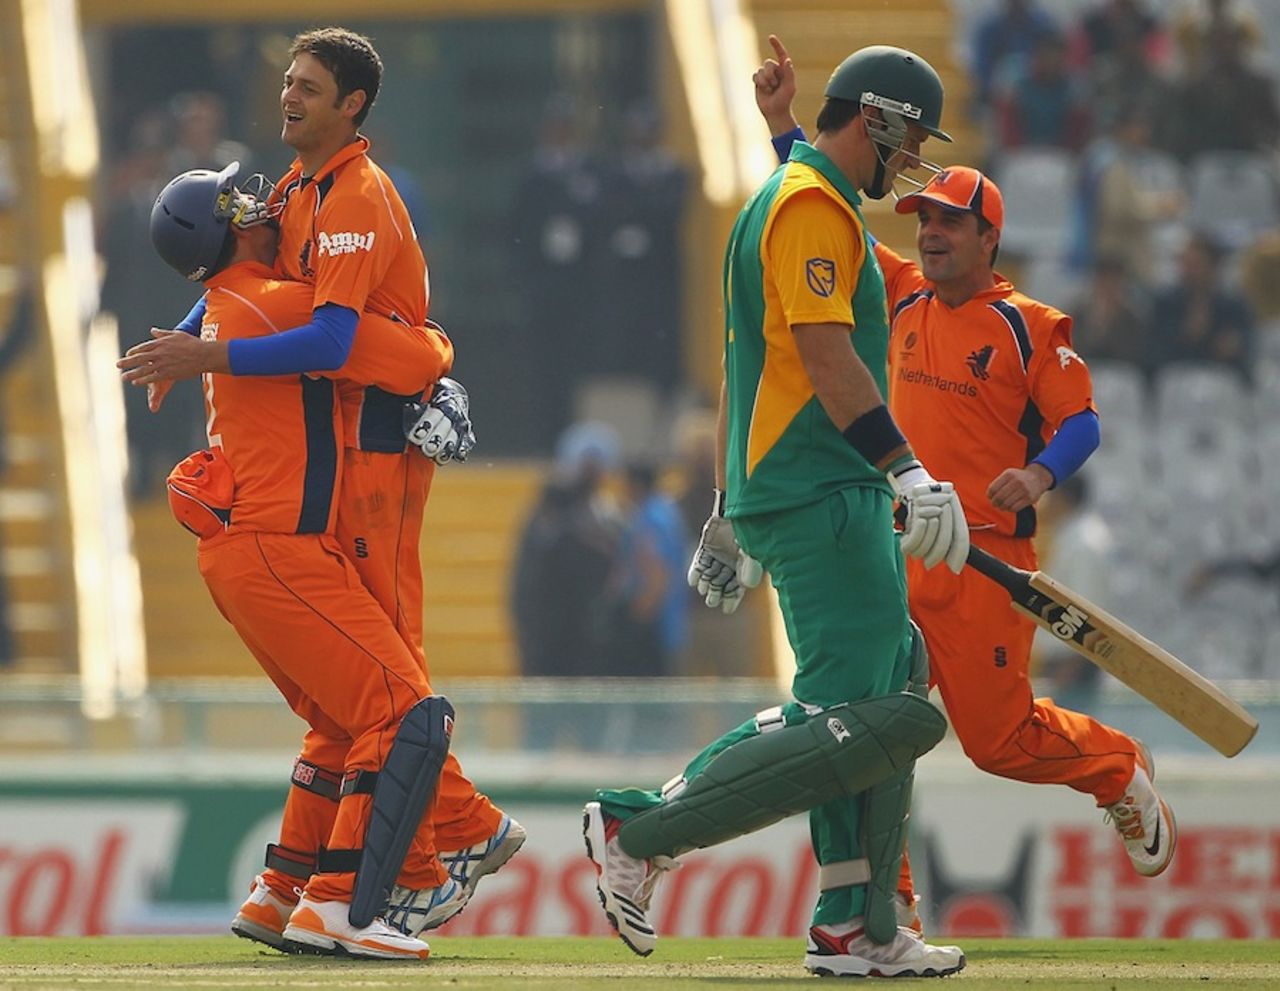 Bernard Loots celebrates Graeme Smith's wicket, Netherlands v South Africa, World Cup 2011, Mohali, March 3, 2011